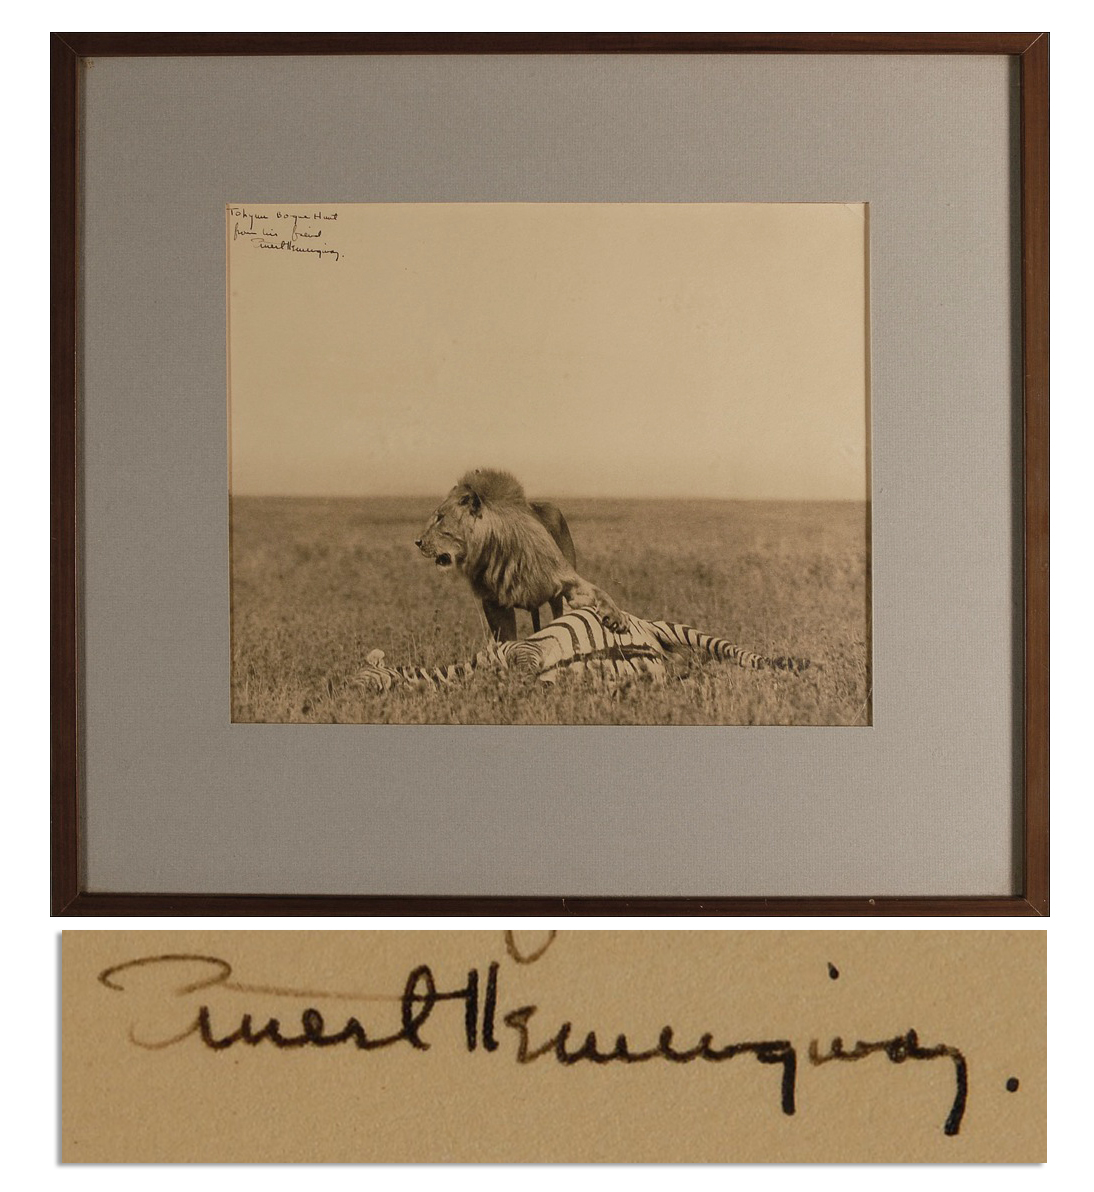 Ernest Hemingway First Edition Amazing Ernest Hemingway Signed Photograph of a Lion and Its Hunt While on Safari -- Large Photograph Measures 11'' x 9''